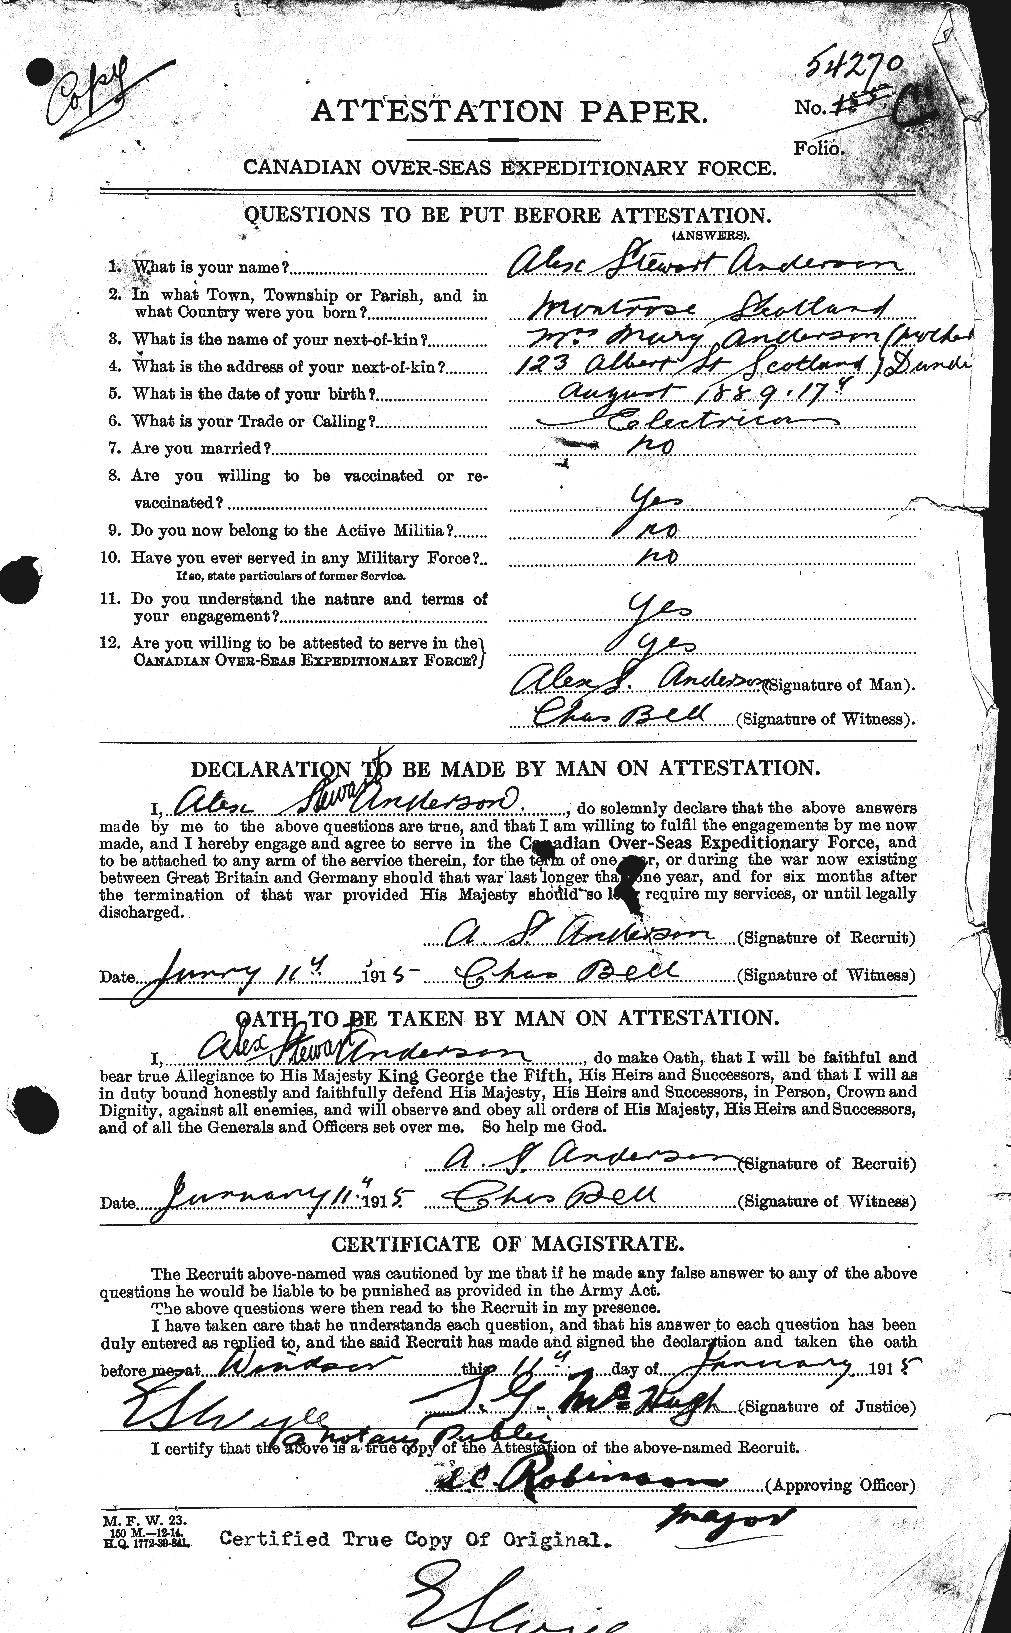 Personnel Records of the First World War - CEF 209526a